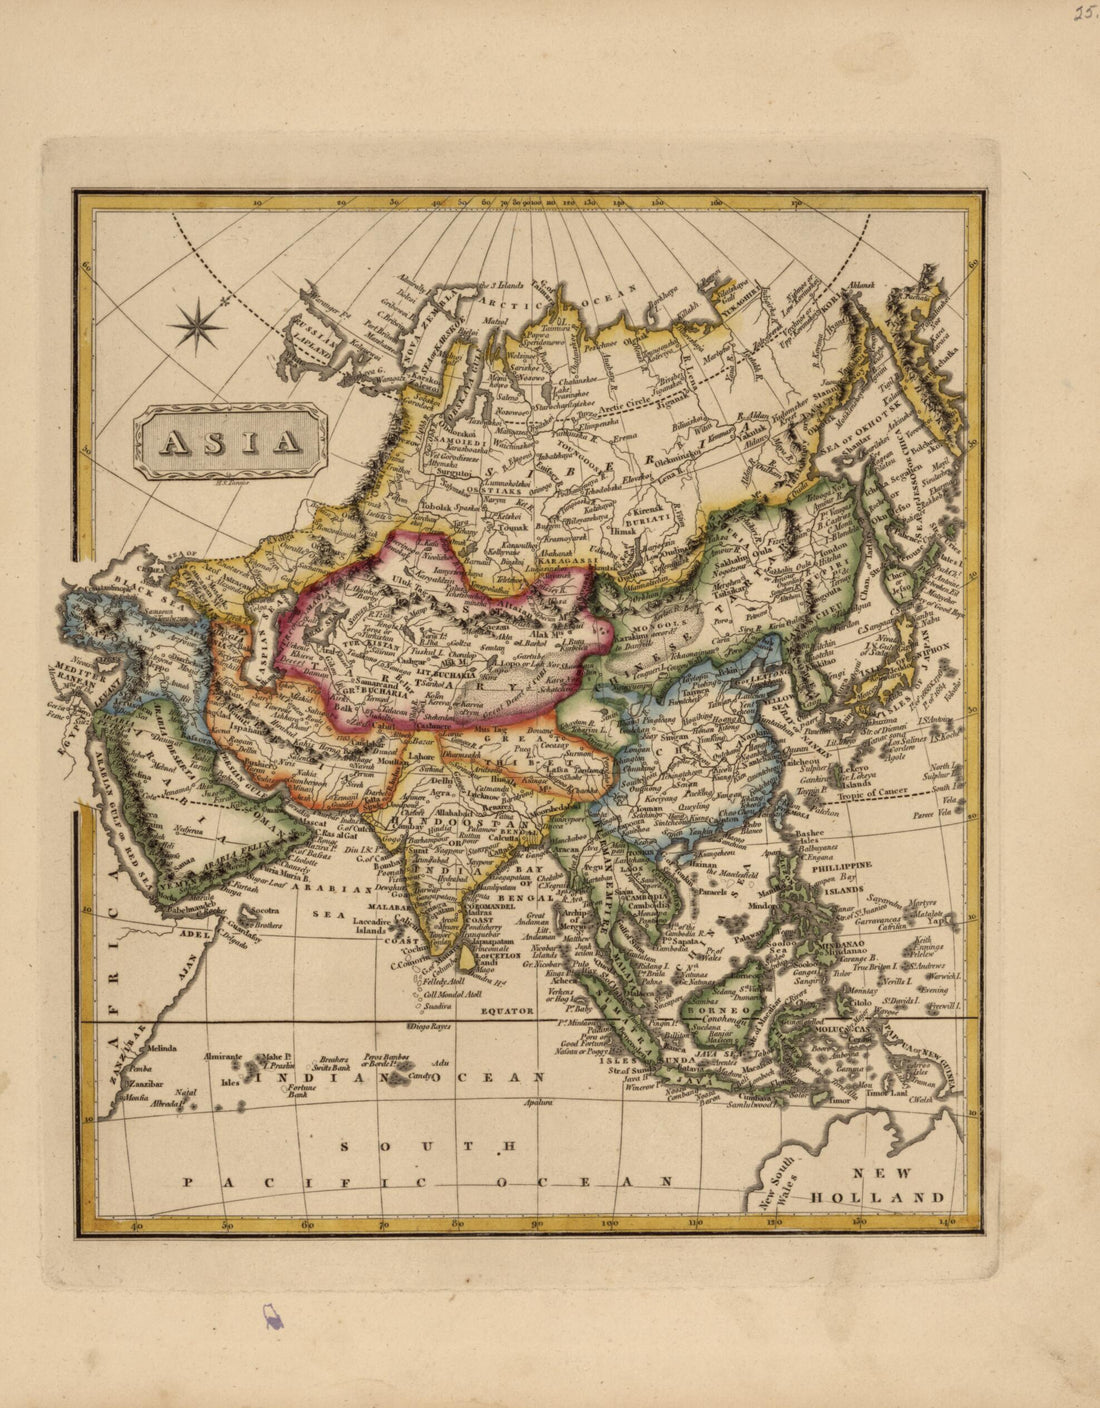 This old map of Asia from a New and Elegant General Atlas, Containing Maps of Each of the United States. from 1817 was created by Henry Schenck Tanner in 1817